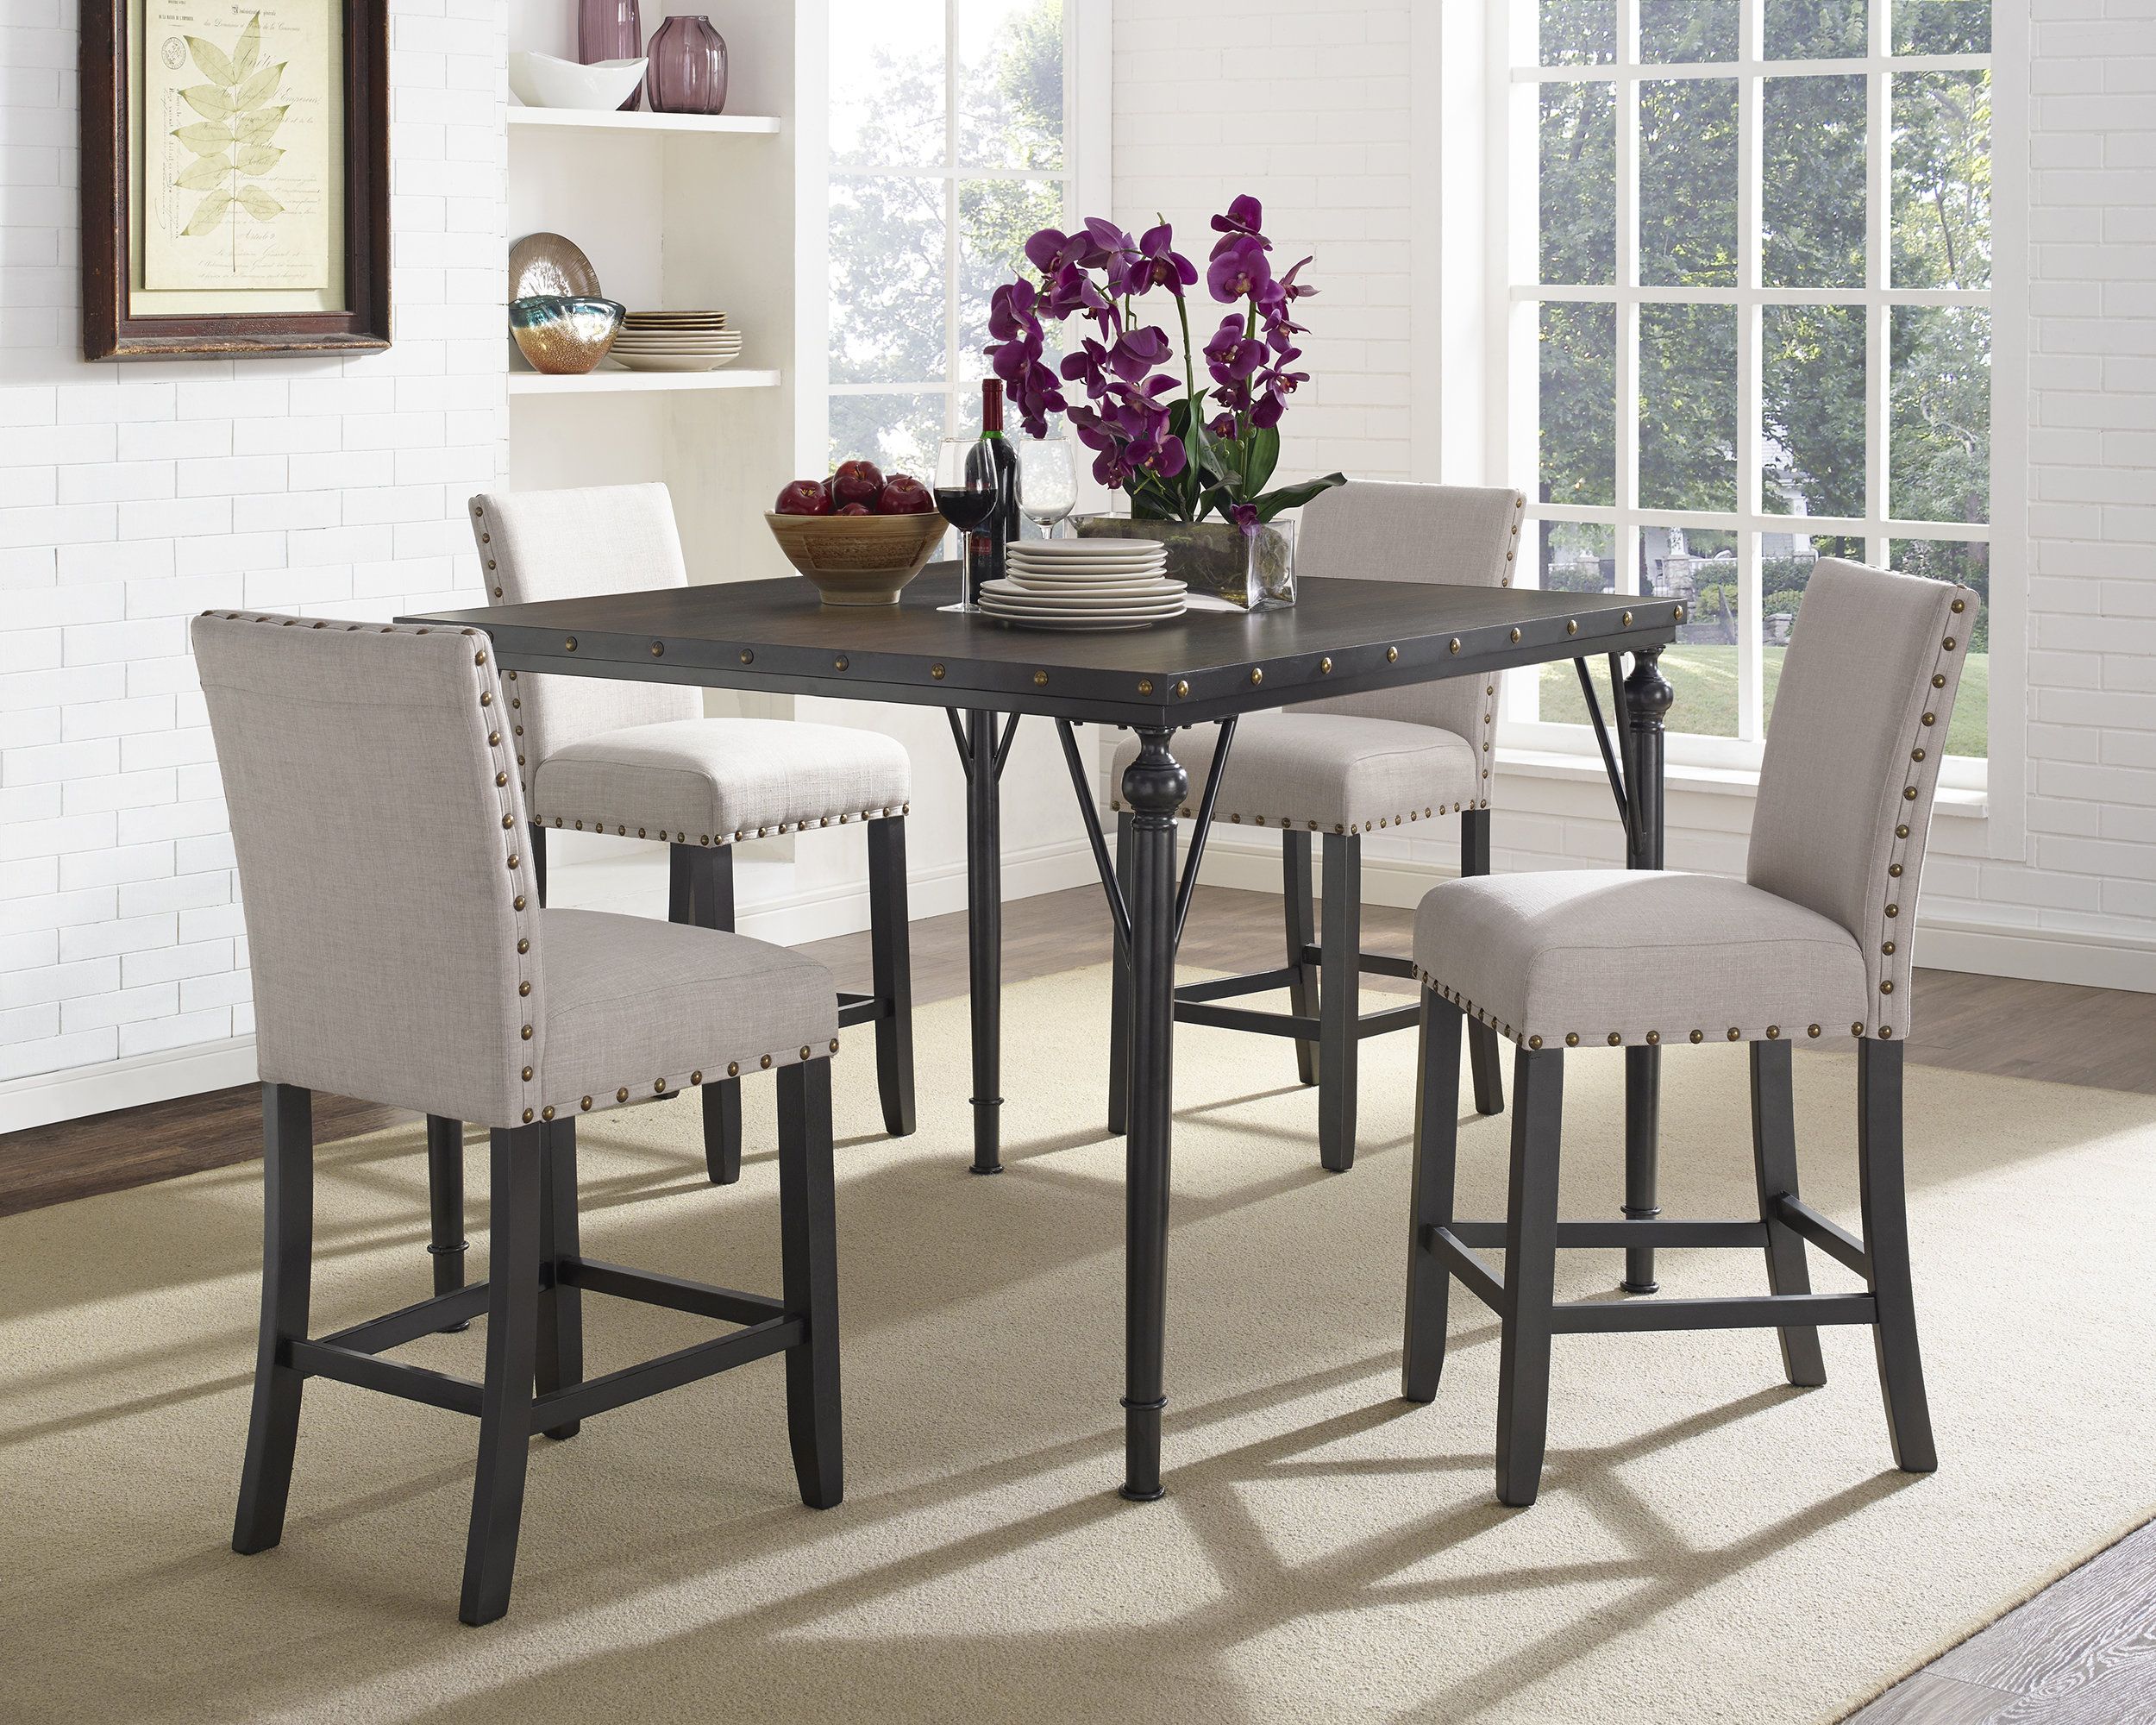 Haysi Wood Counter Height 5 Piece Dining Set With Fabric Nailhead For 2017 Pattonsburg 5 Piece Dining Sets (View 13 of 20)